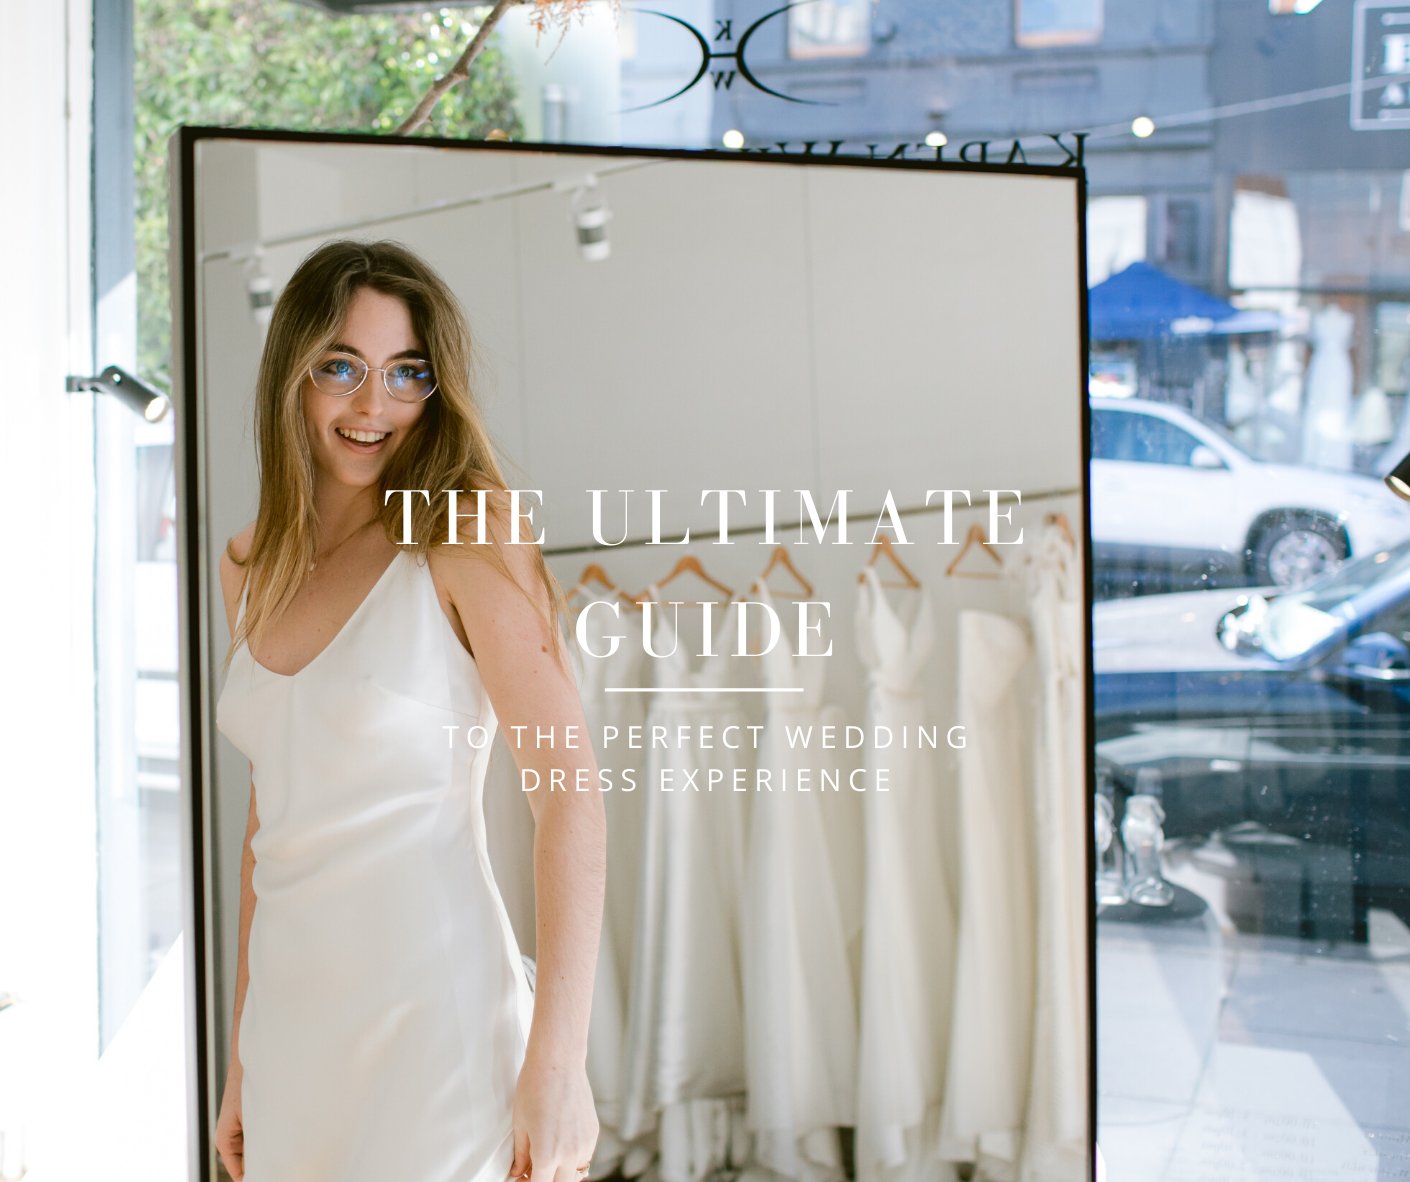 Wedding Dress Shopping 101: Tips from Expert Bridal Stylists